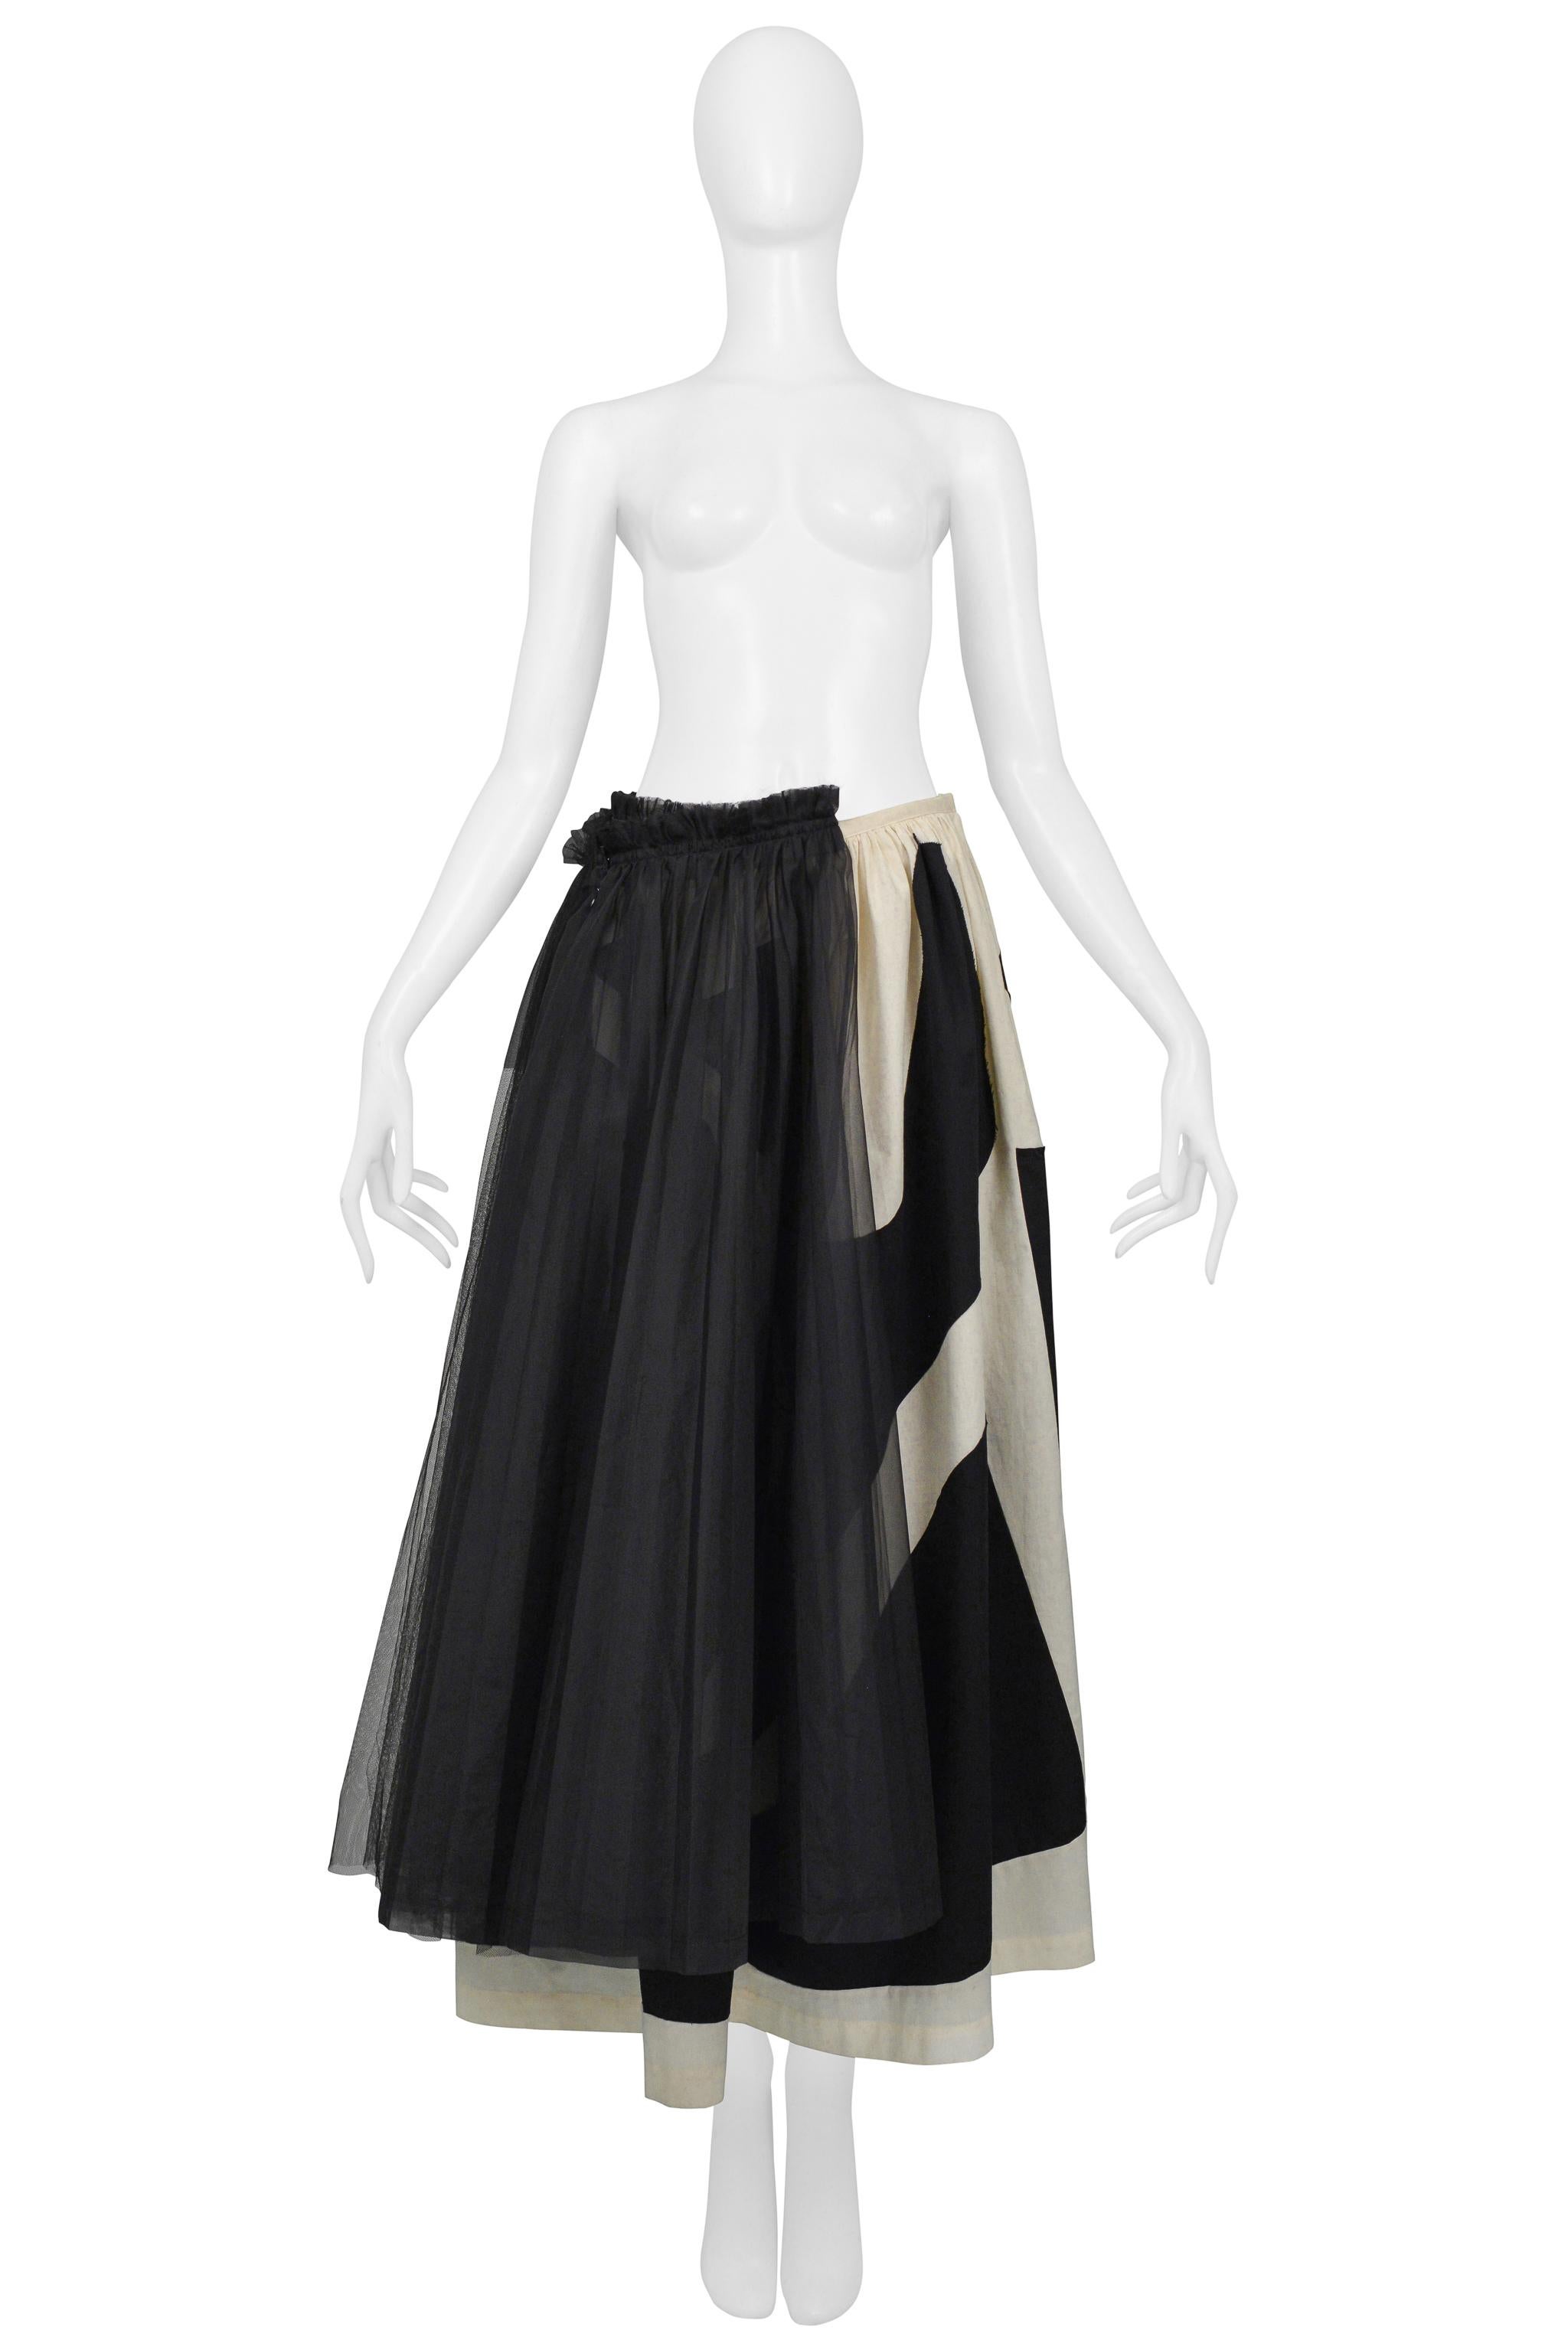 Comme Des Garcons Off-White & Black Abstract Skirt With Black Tulle 2002 In Excellent Condition For Sale In Los Angeles, CA